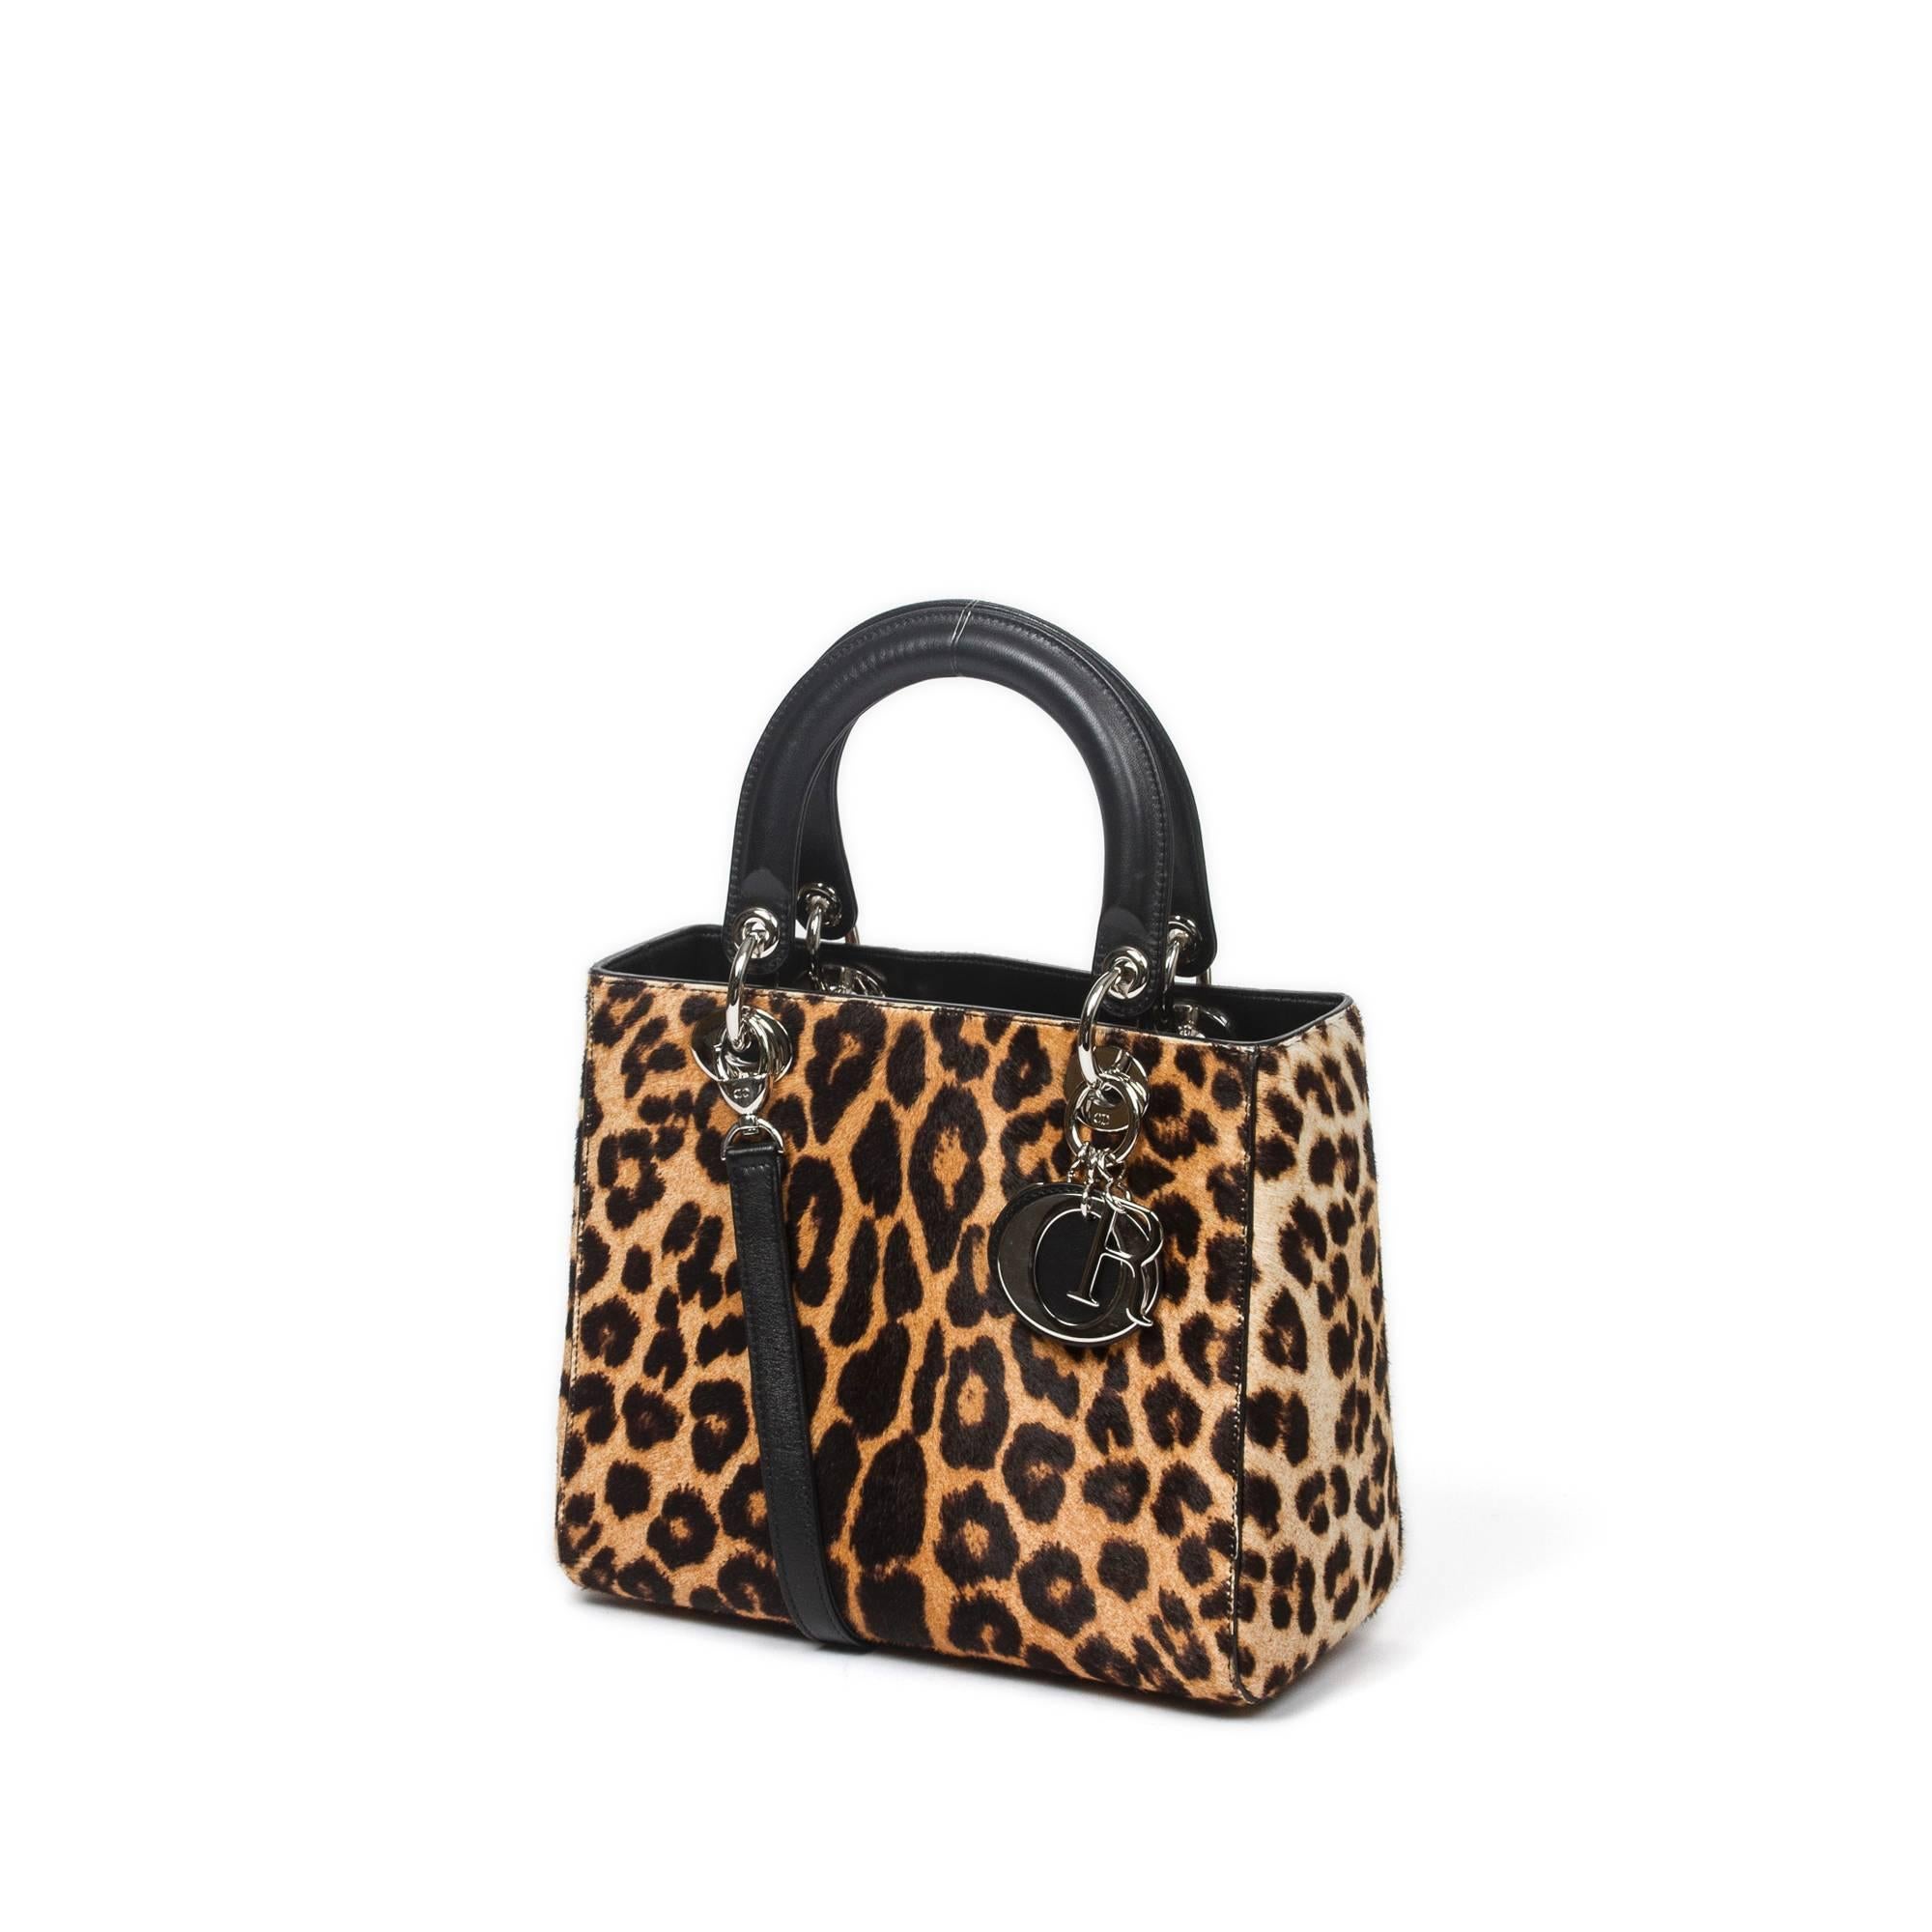 Dior Lady Dior MM 24cm in leopard print pony hair with black leather handles (10cm) and shoulder strap (43cm). Silver tone hardware. Top zipper closure. Black leather lined interior with one zipper pocket. Dustbag included. Production Code